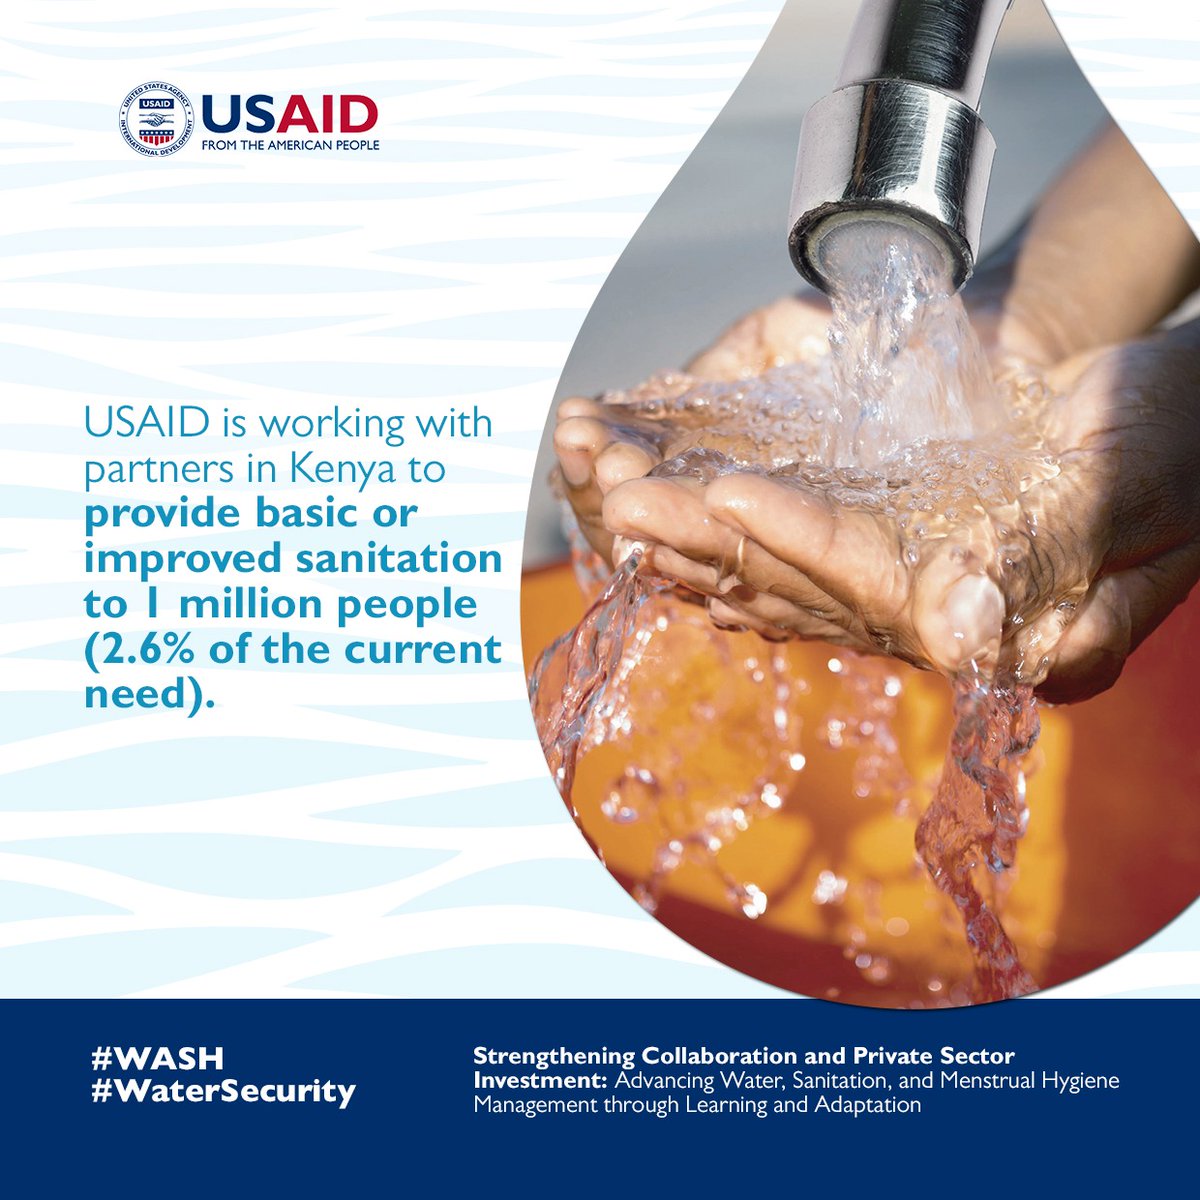 Sustainable solutions for a brighter future! USAID's support in Kenya has transformed lives, ensuring more communities have access to basic water services. #WASH #WaterSecurity